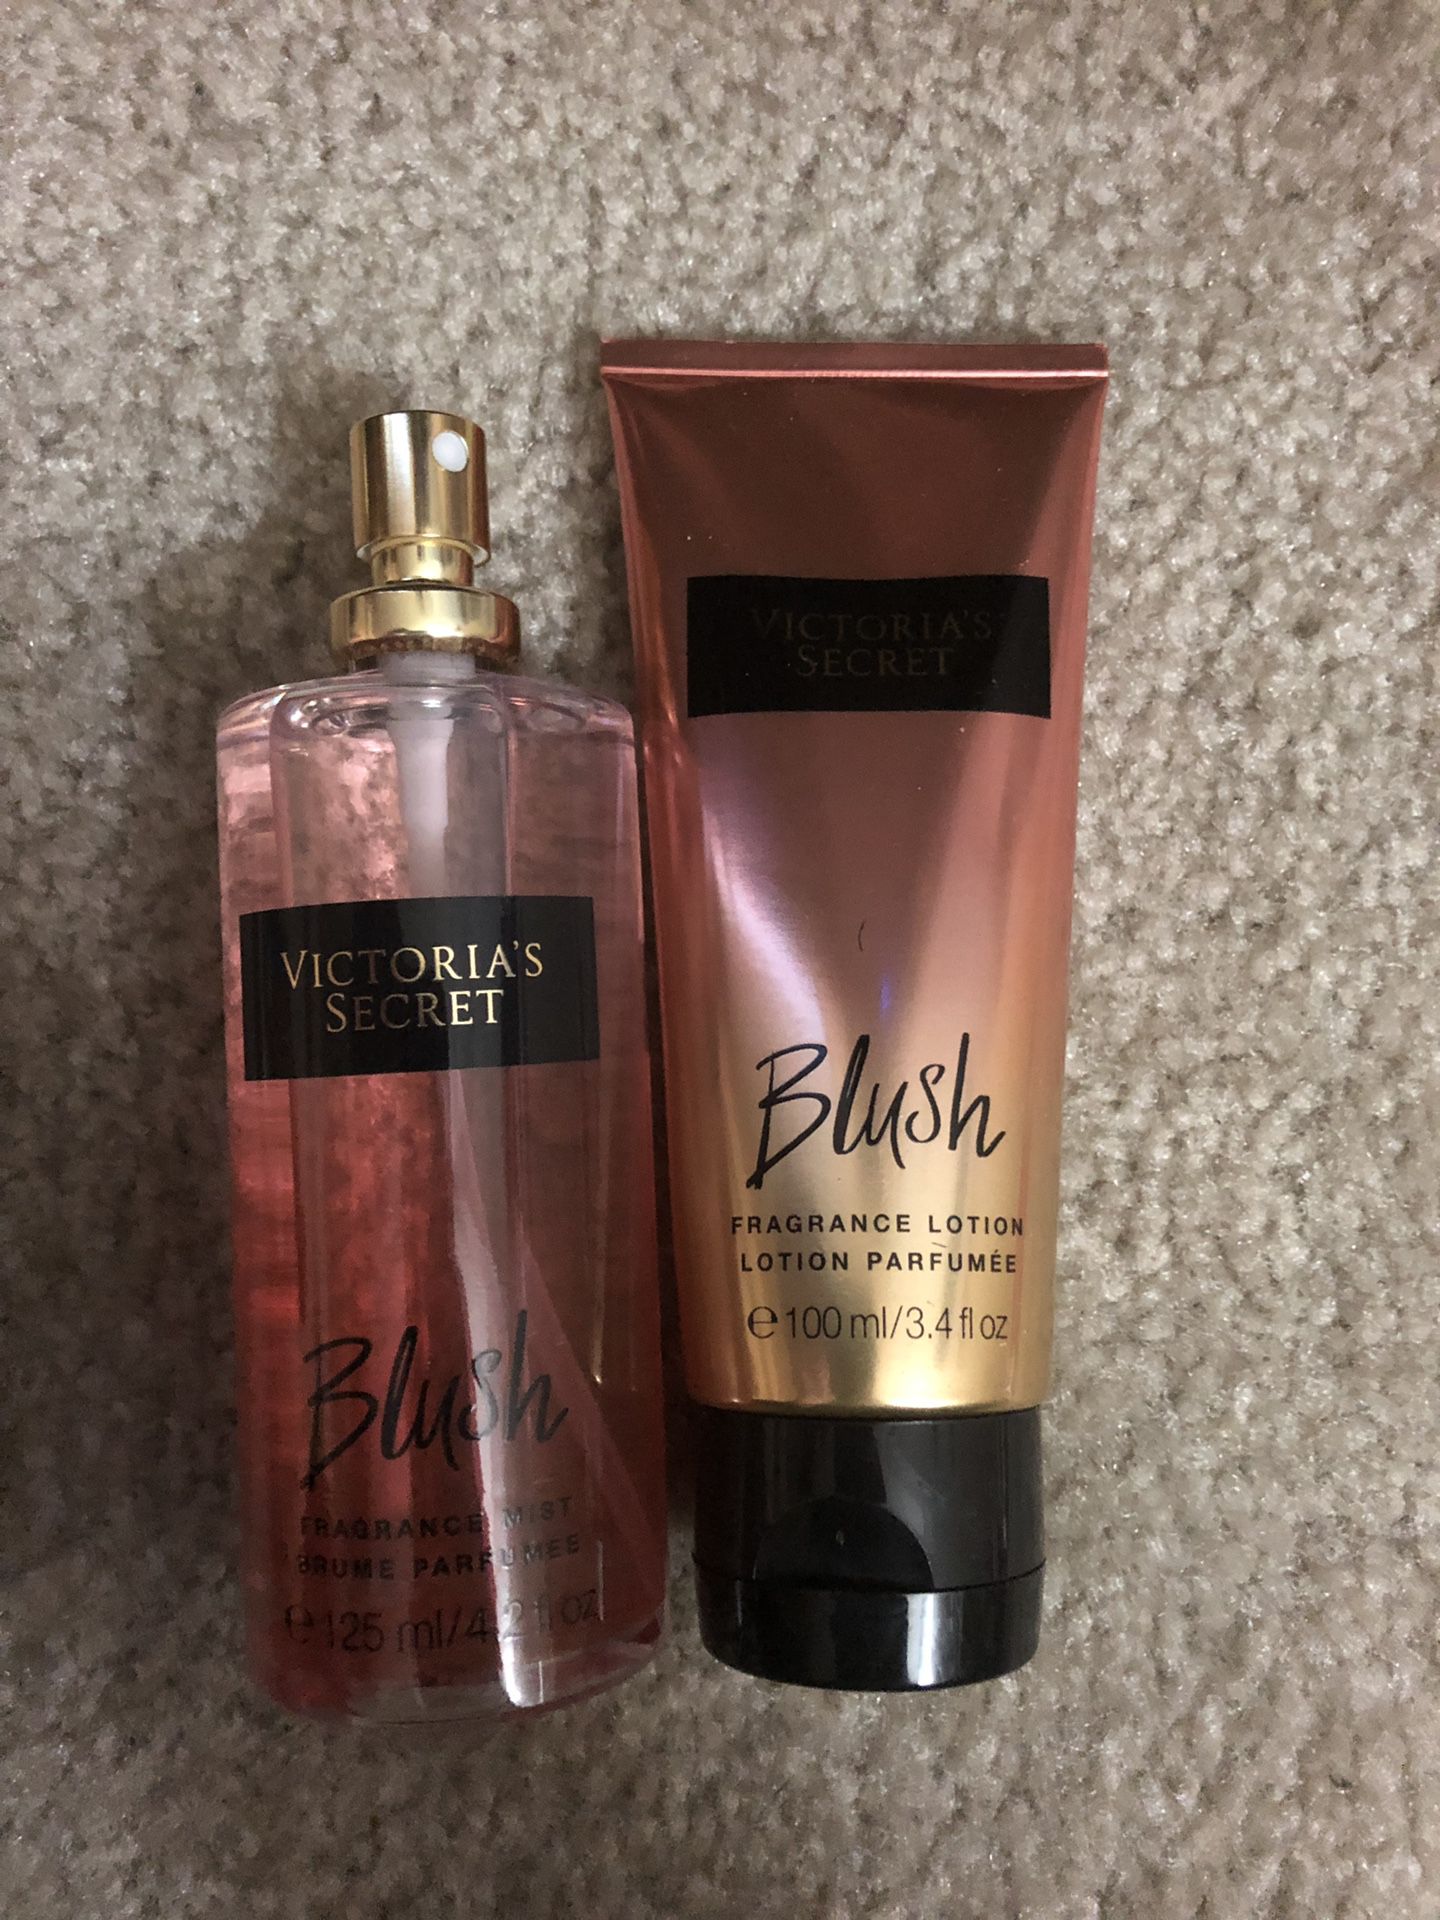 Victoria secrets sprays and lotion each $10